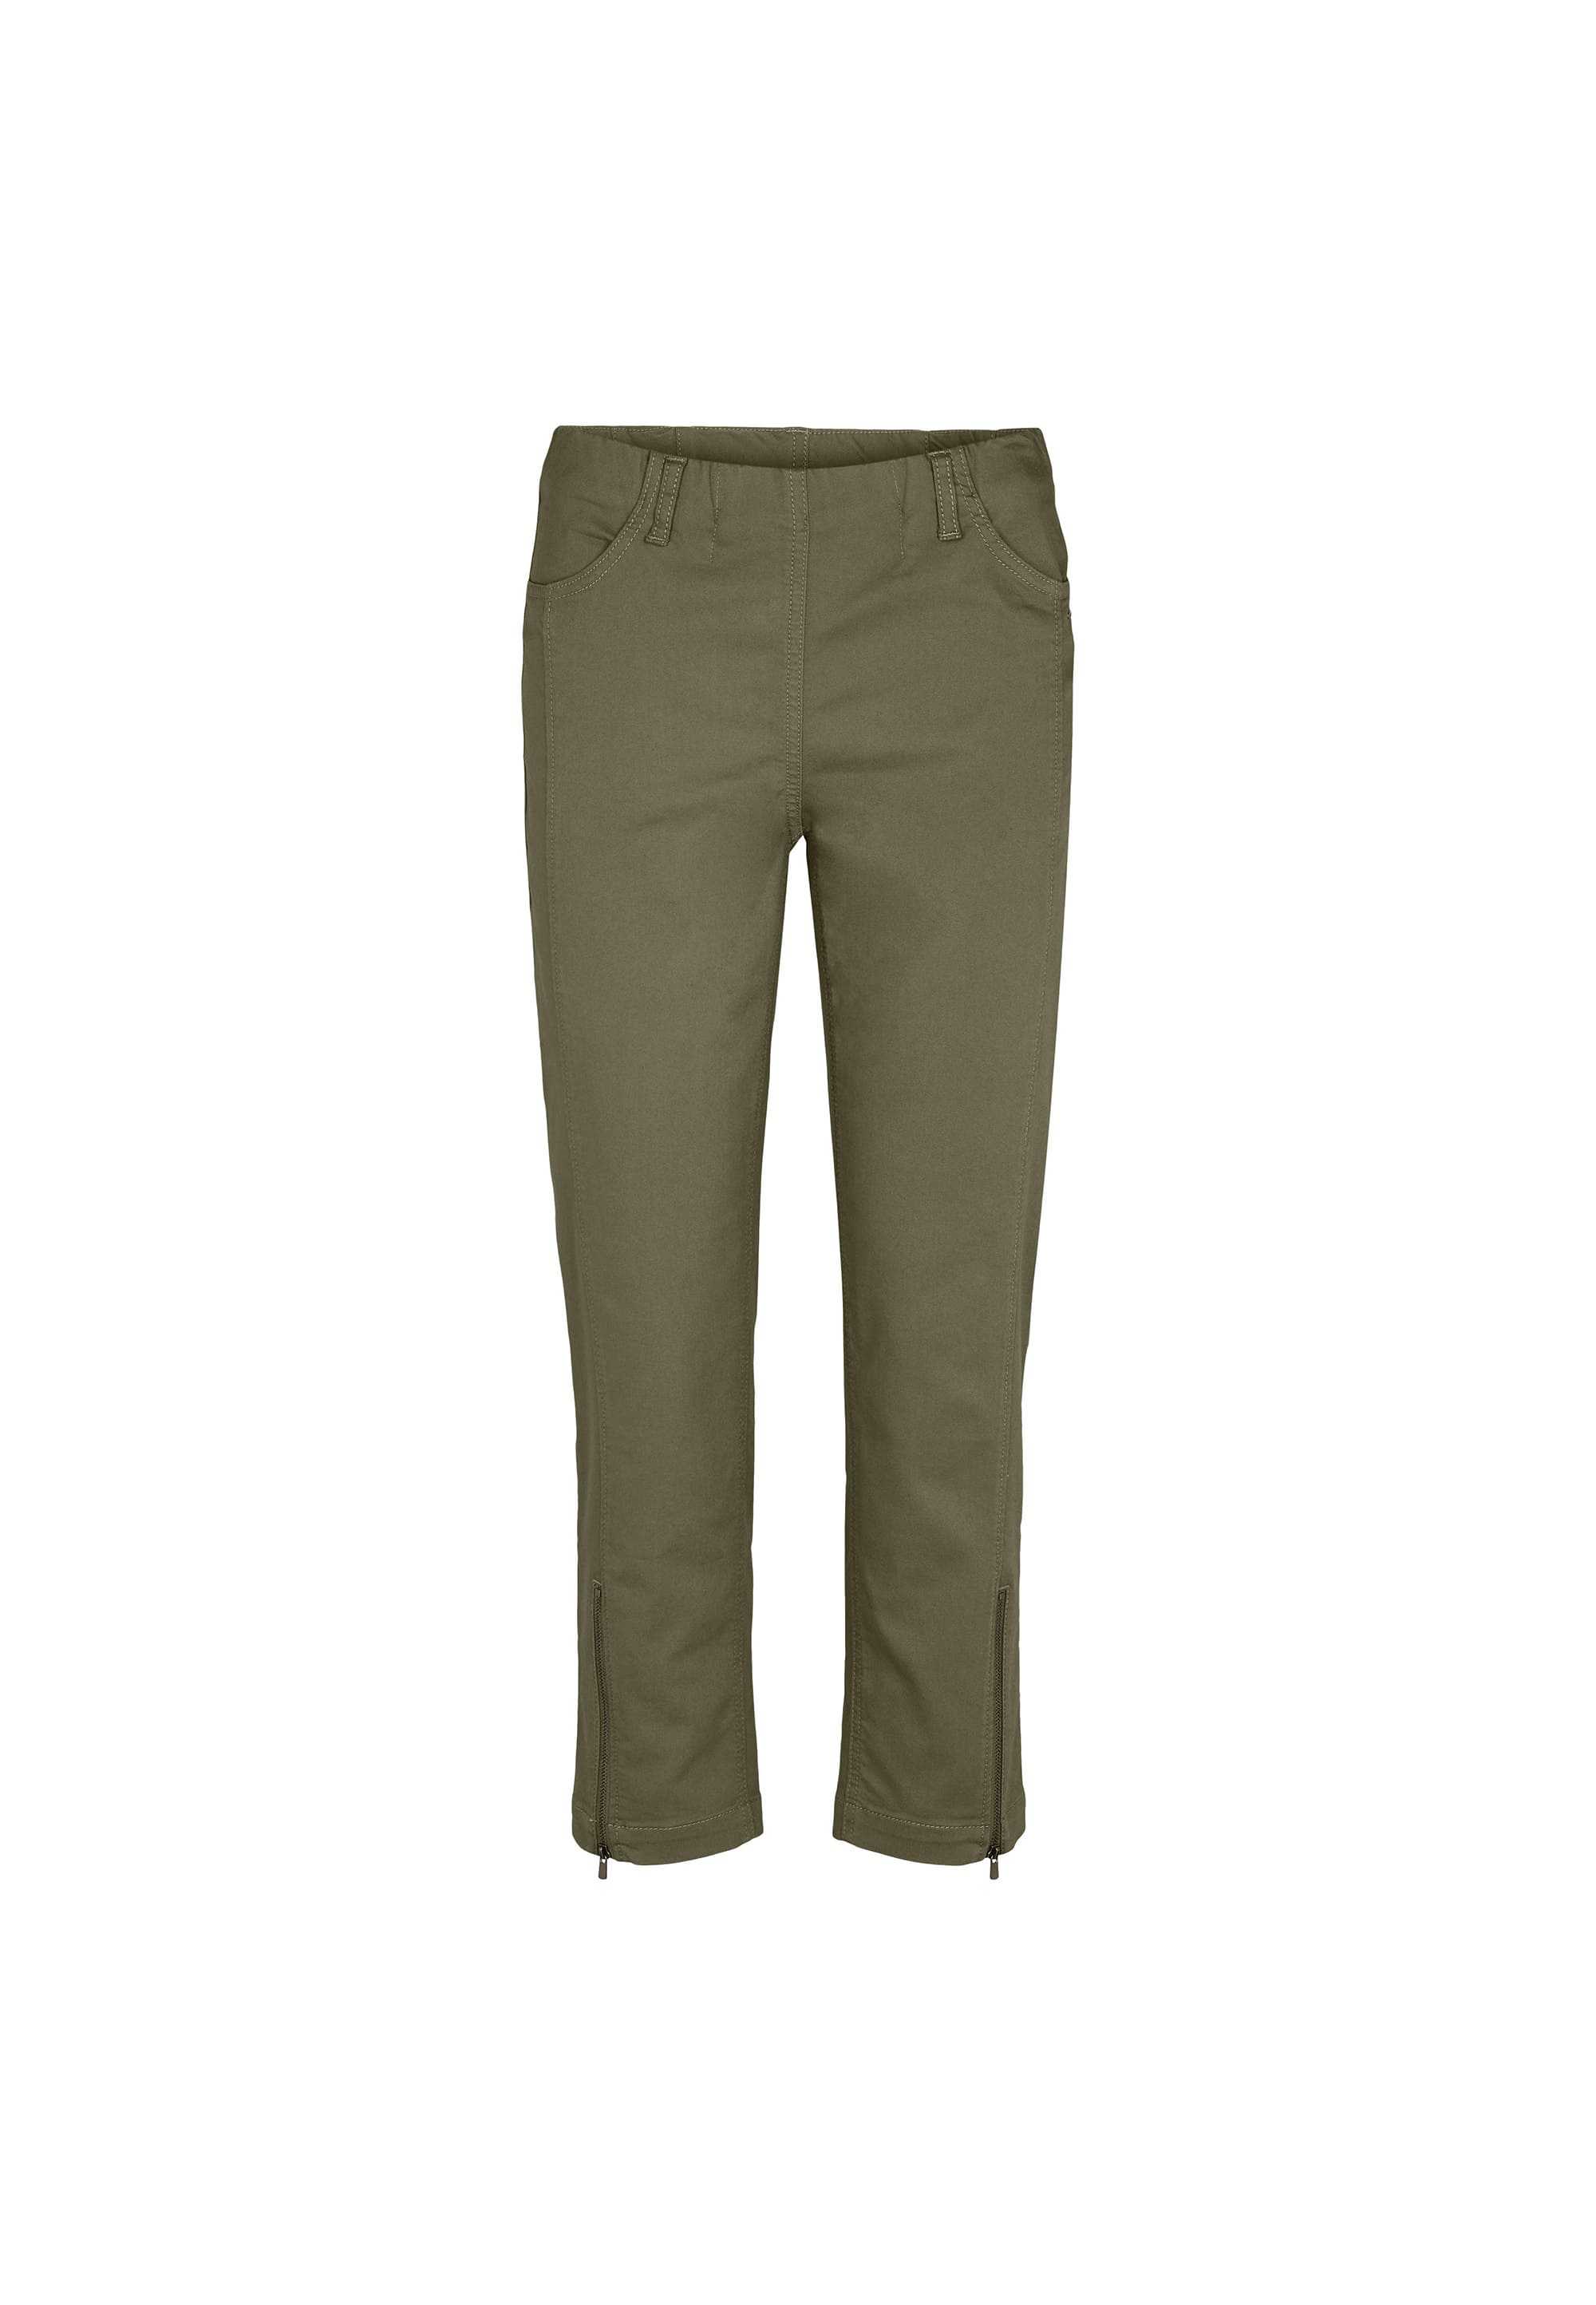 LAURIE Piper Regular Crop Trousers REGULAR 55000 Dried Olive